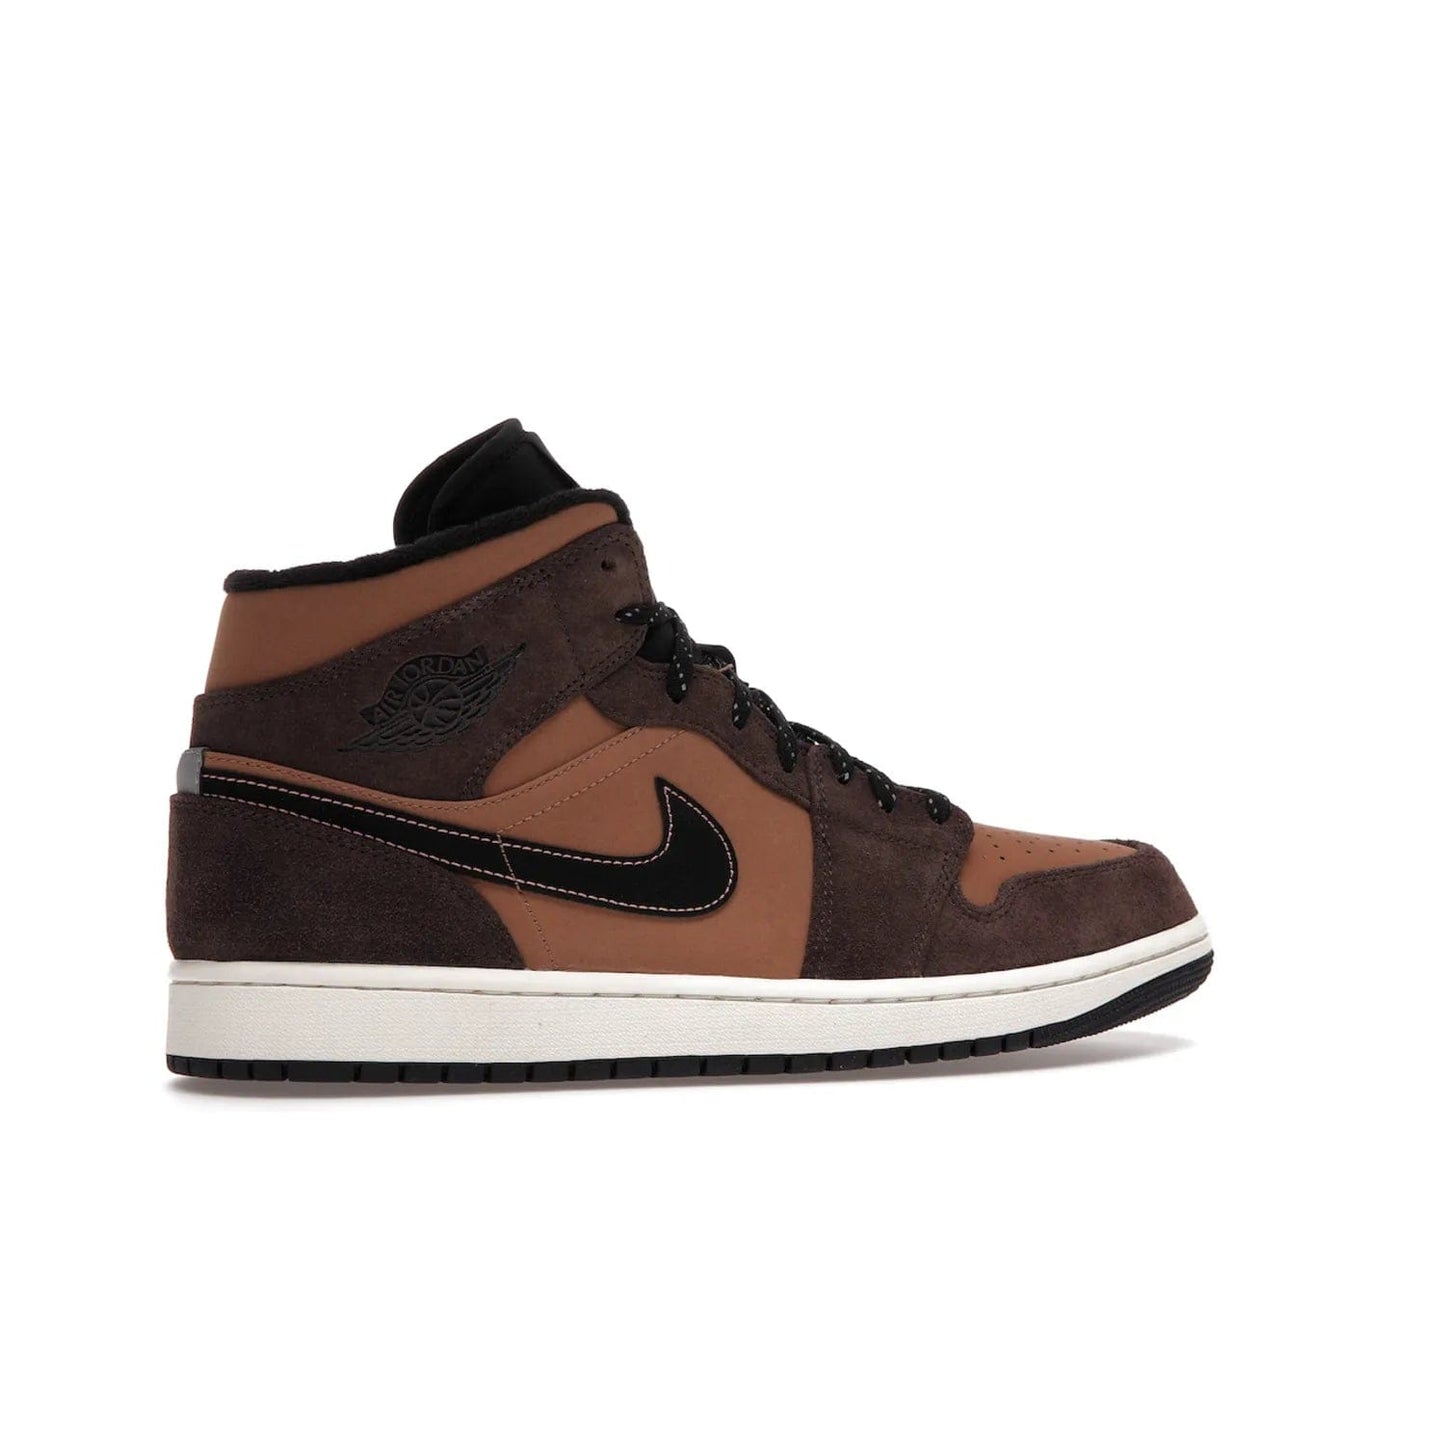 Jordan 1 Mid SE Dark Chocolate - Image 35 - Only at www.BallersClubKickz.com - This fashionable and functional Jordan 1 Mid SE Dark Chocolate features a light brown Durabuck upper, dark brown suede overlays, black Swoosh logos and reflective patch at heel. A must-have for any sneakerhead!